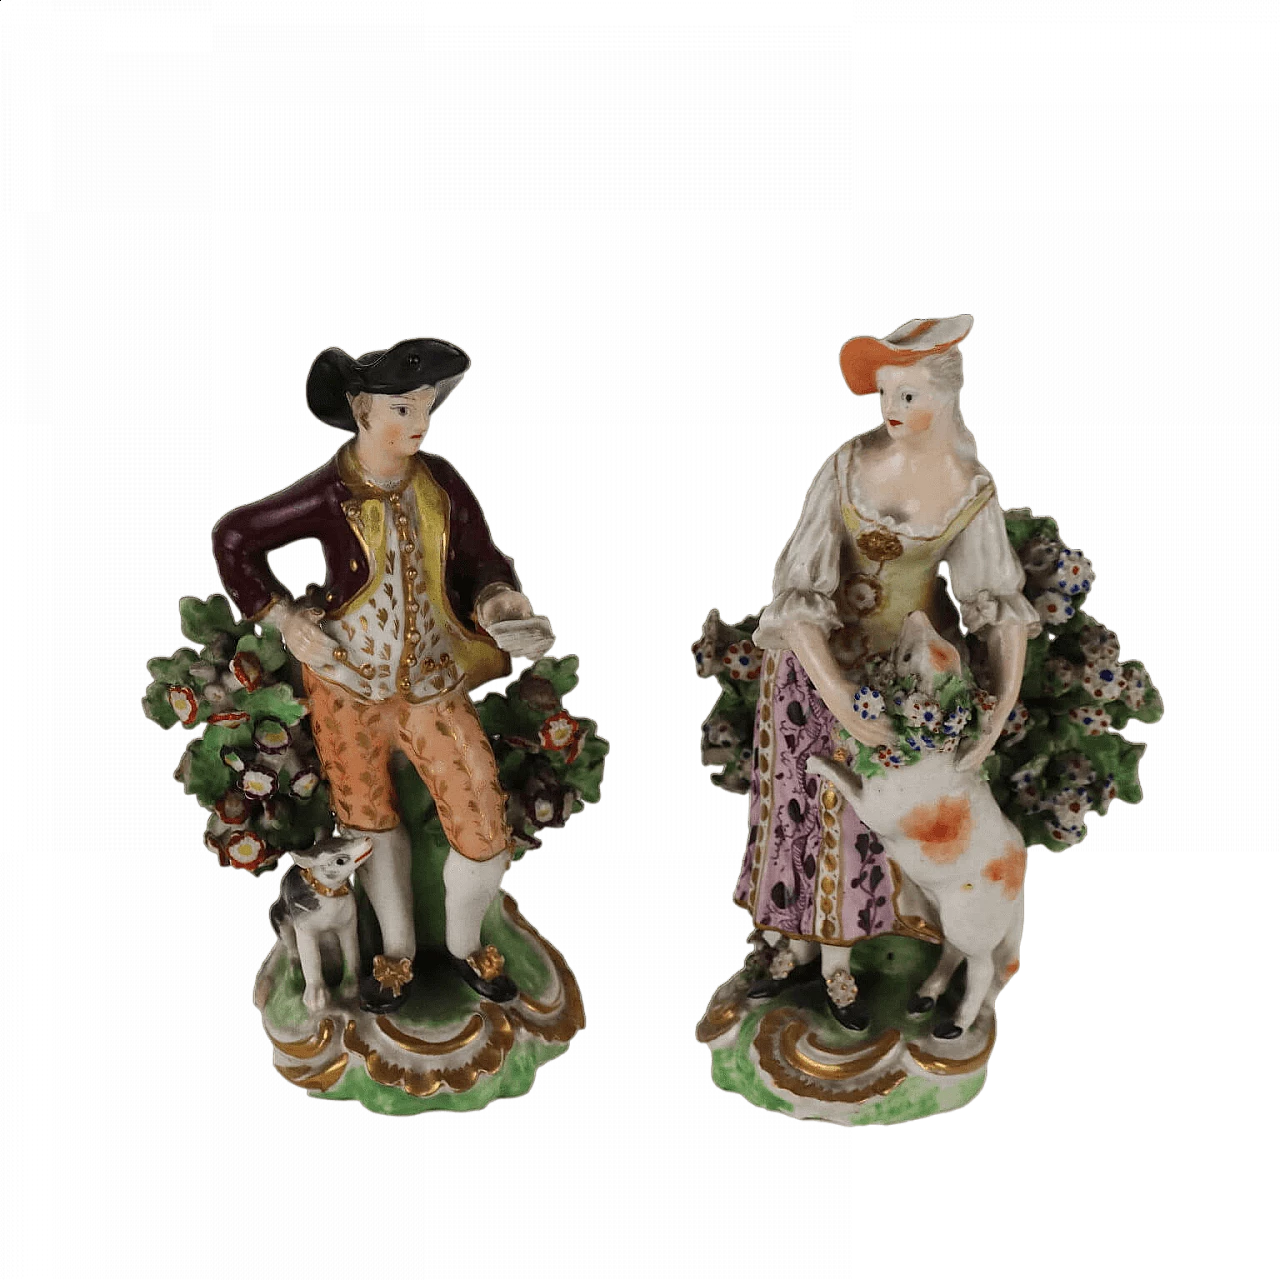 Pair of polychrome porcelain figurines, 19th century 11